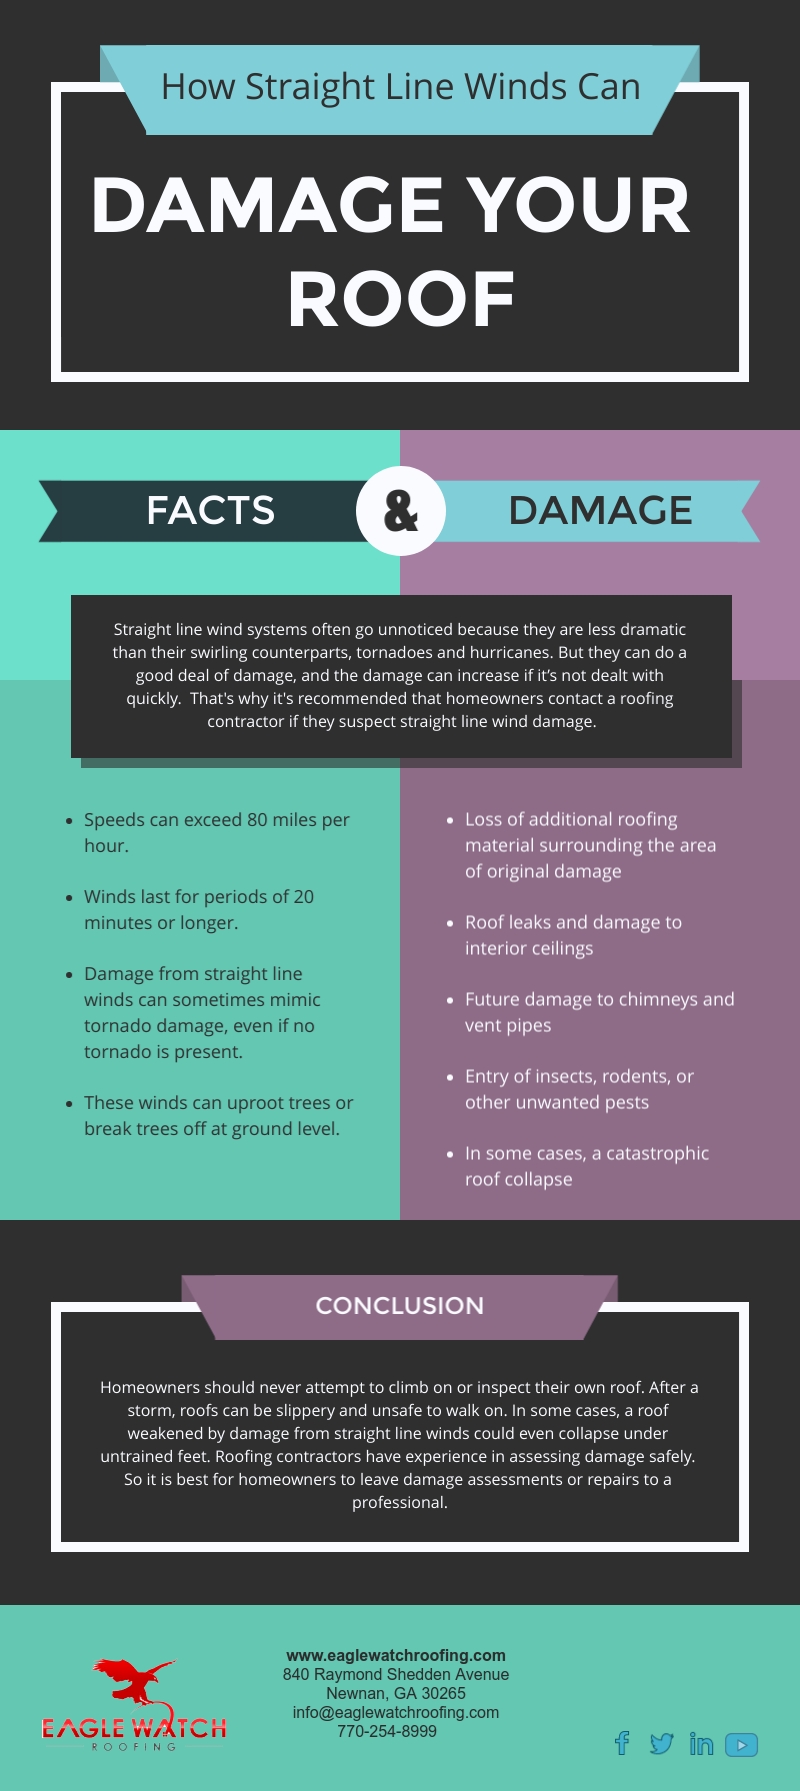 How Straight Line Winds Can Damage Your Roof [infographic]